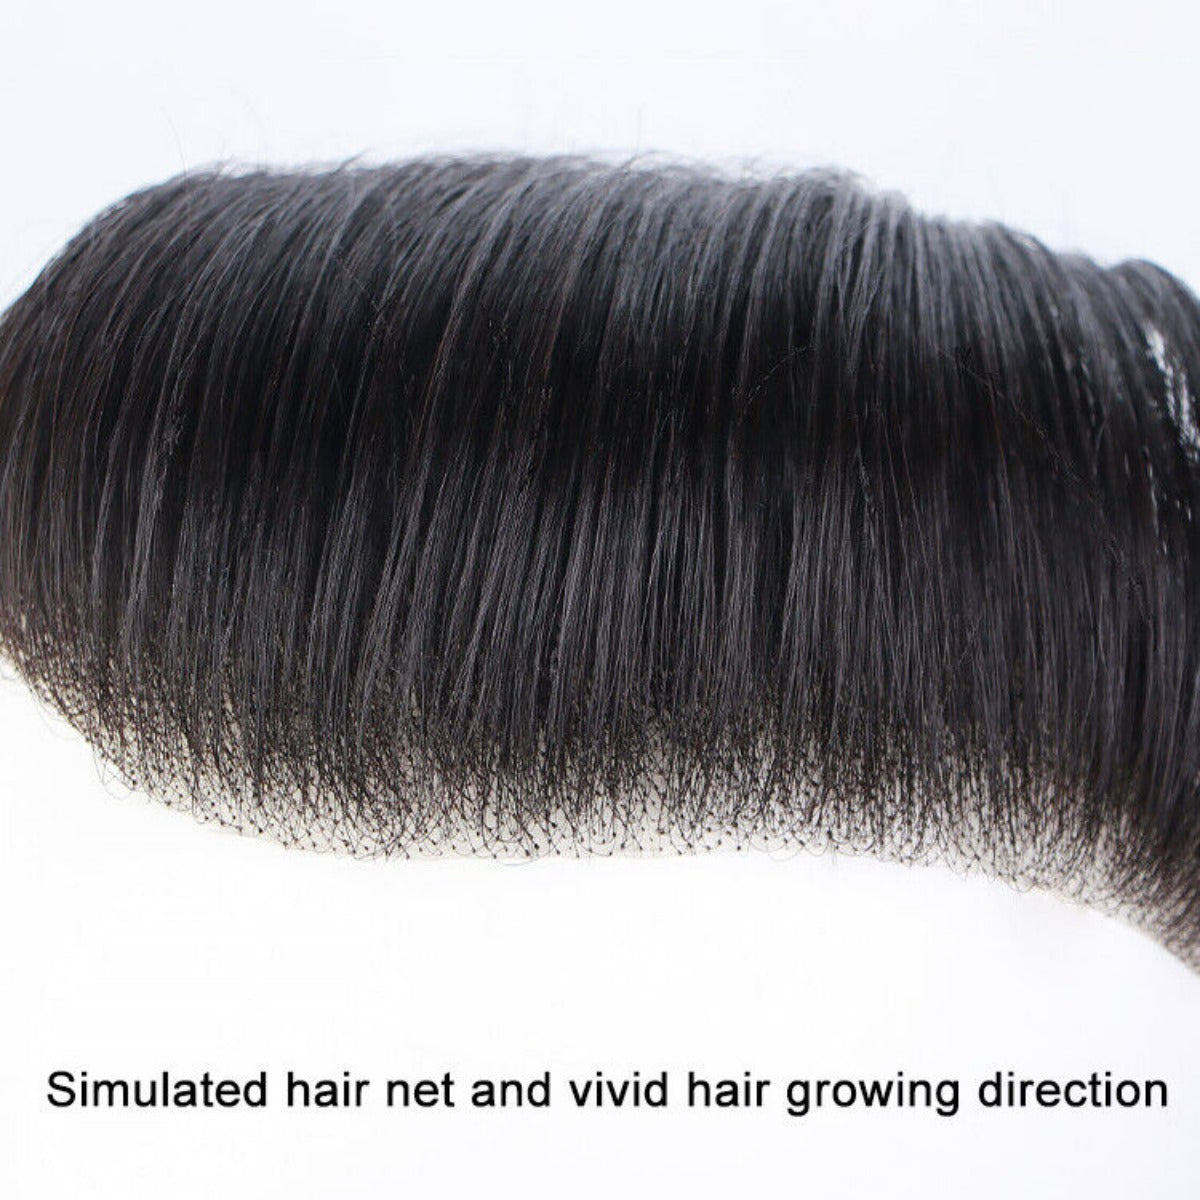  Men's Hairline Toupee Real Human Hair Men Forehead Topper Hairpiece Thin Human Hair Toupee Replacement